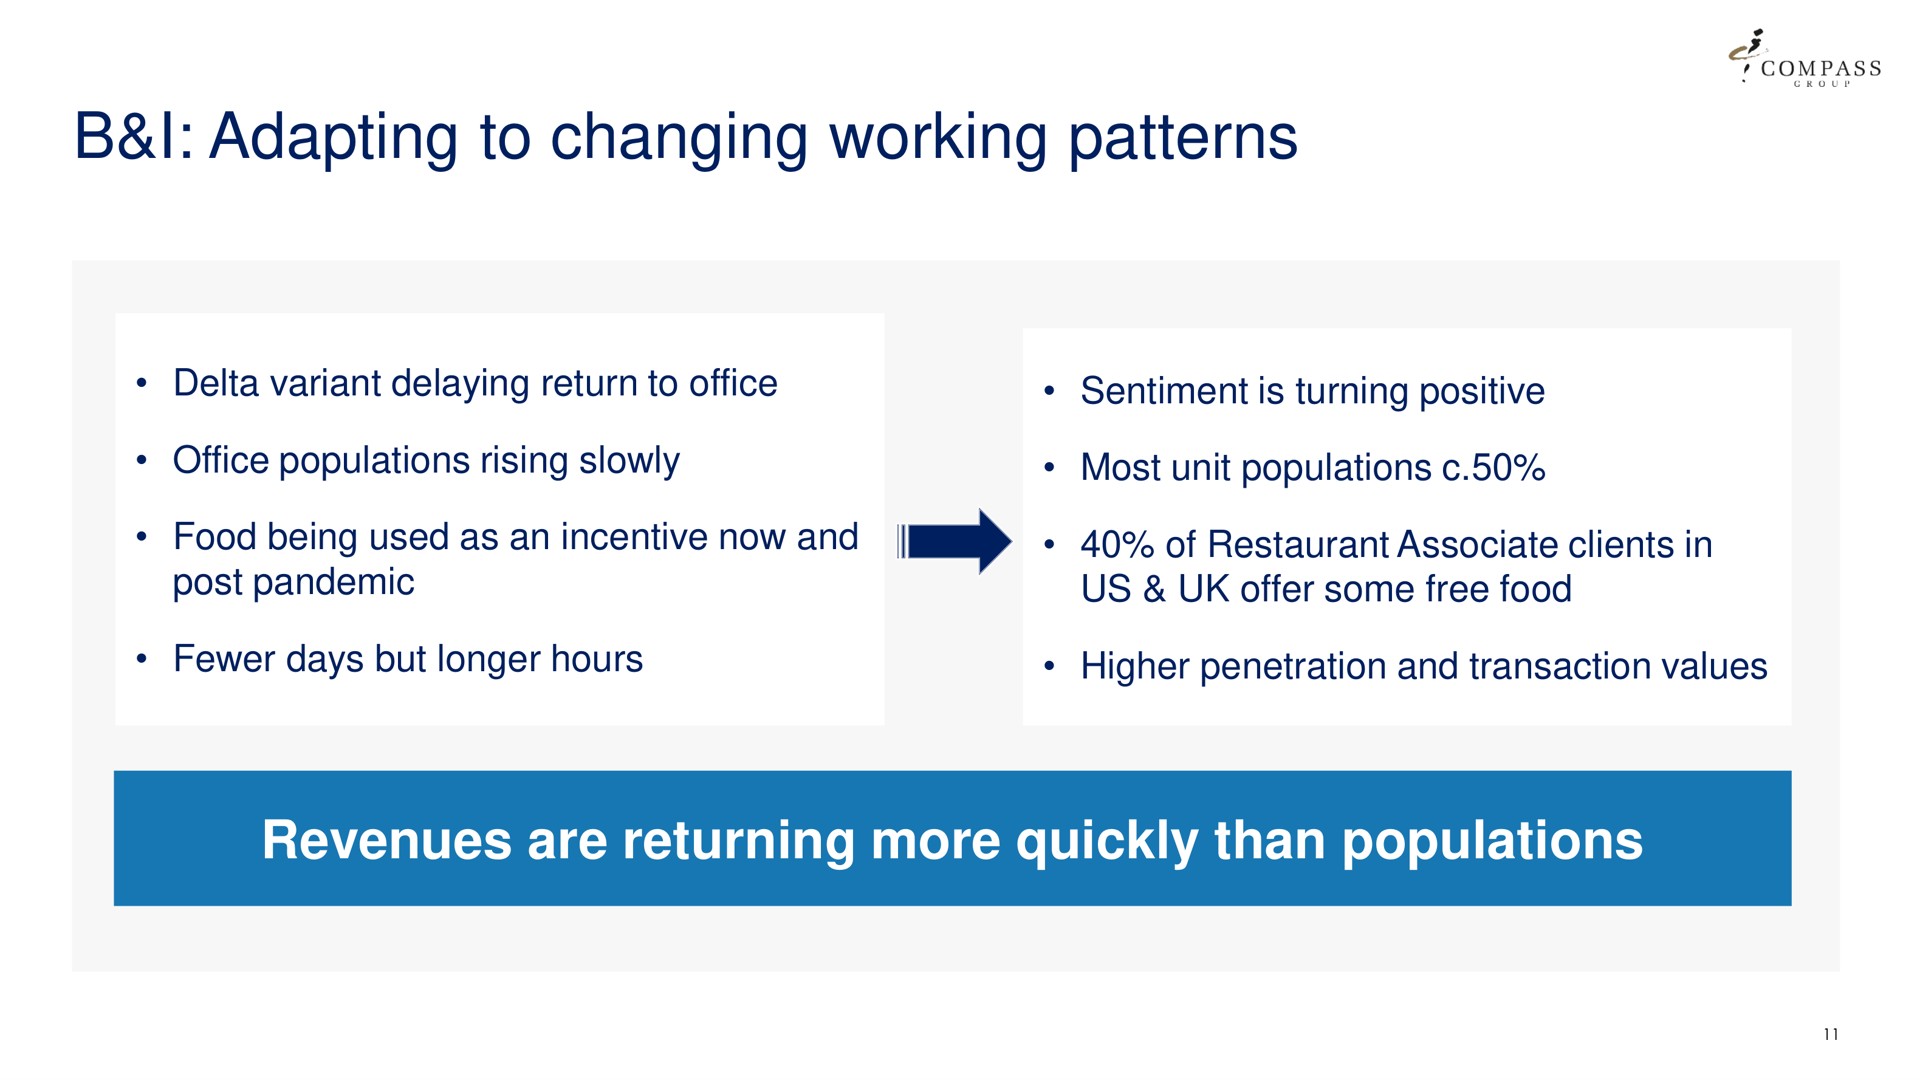 i adapting to changing working patterns | Compass Group